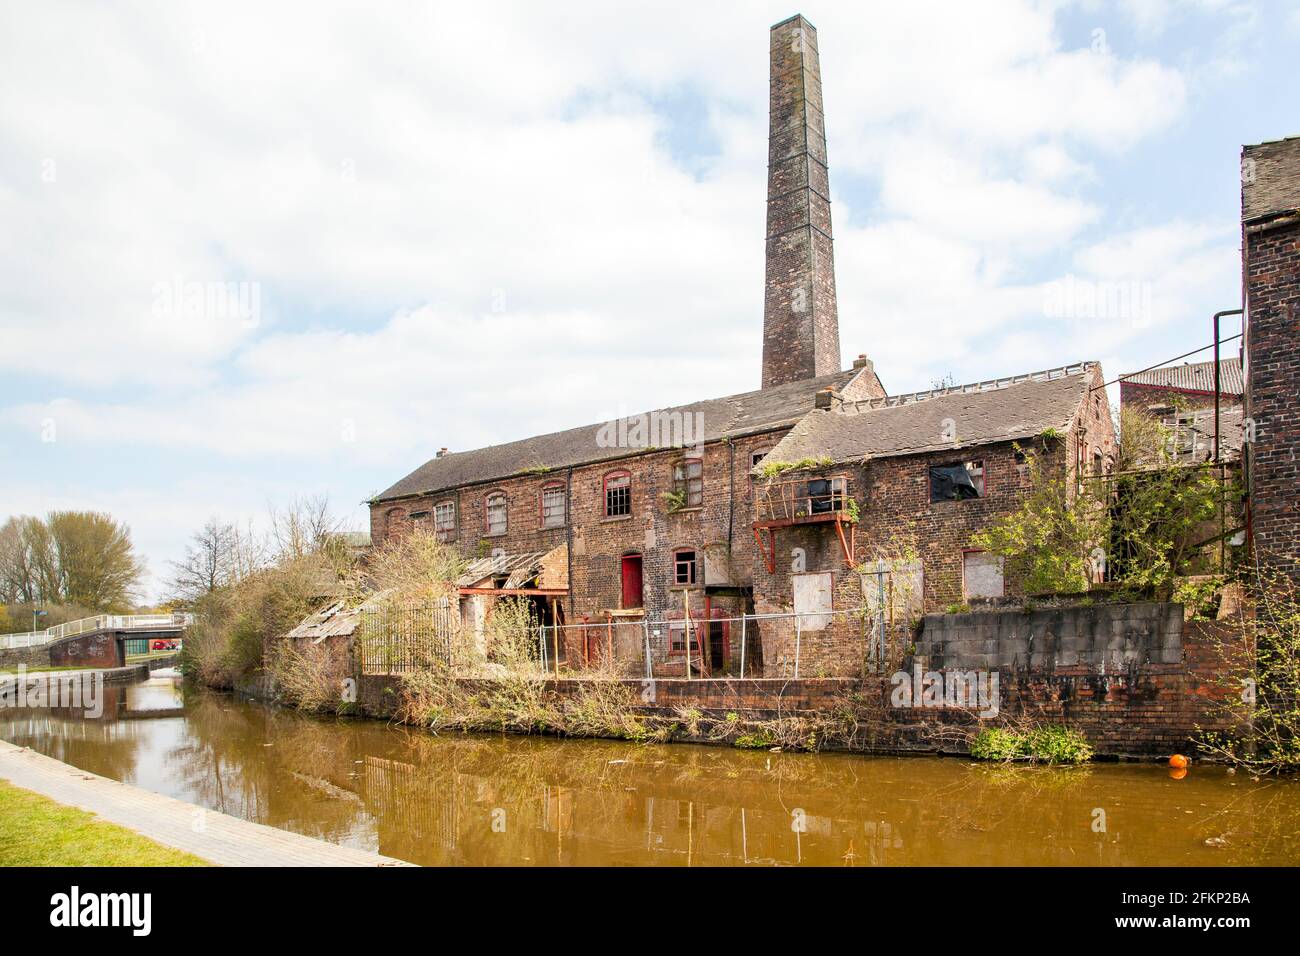 The old disused bottle kiln at the former Price and Kensington pottery works on the banks of the Trent and Mersey canal in Longport Stoke on Trent Stock Photo